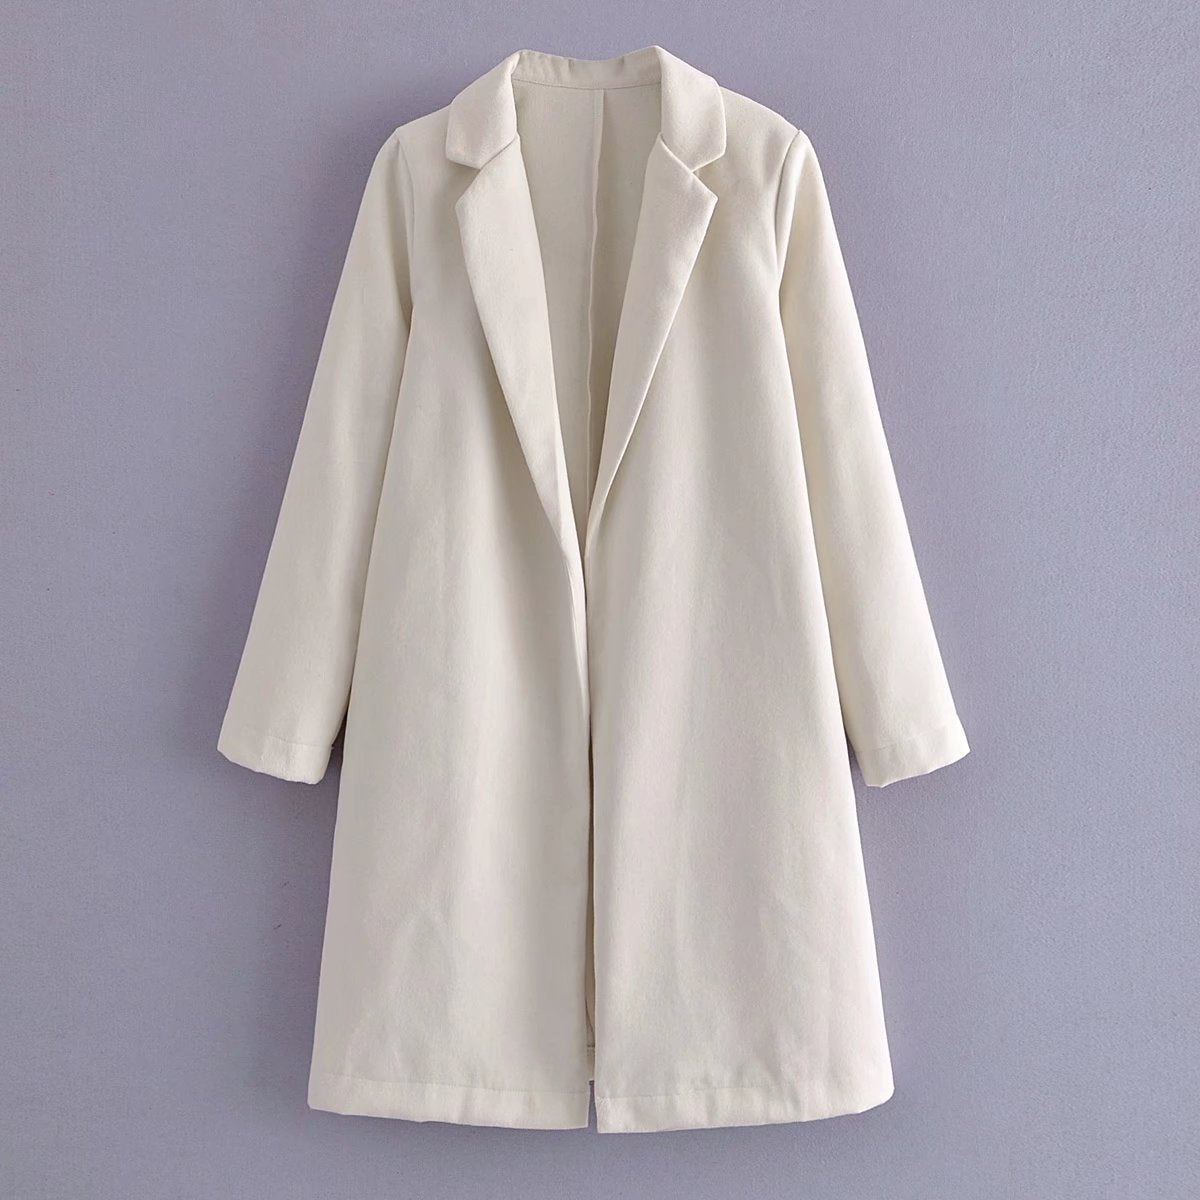 OOTDGIRL Women 2022 New Fashion Basic Suit Collar Mid-Length Overcoat Coat Vintage Long Sleeve No Buttons Female Outerwear Chic Tops